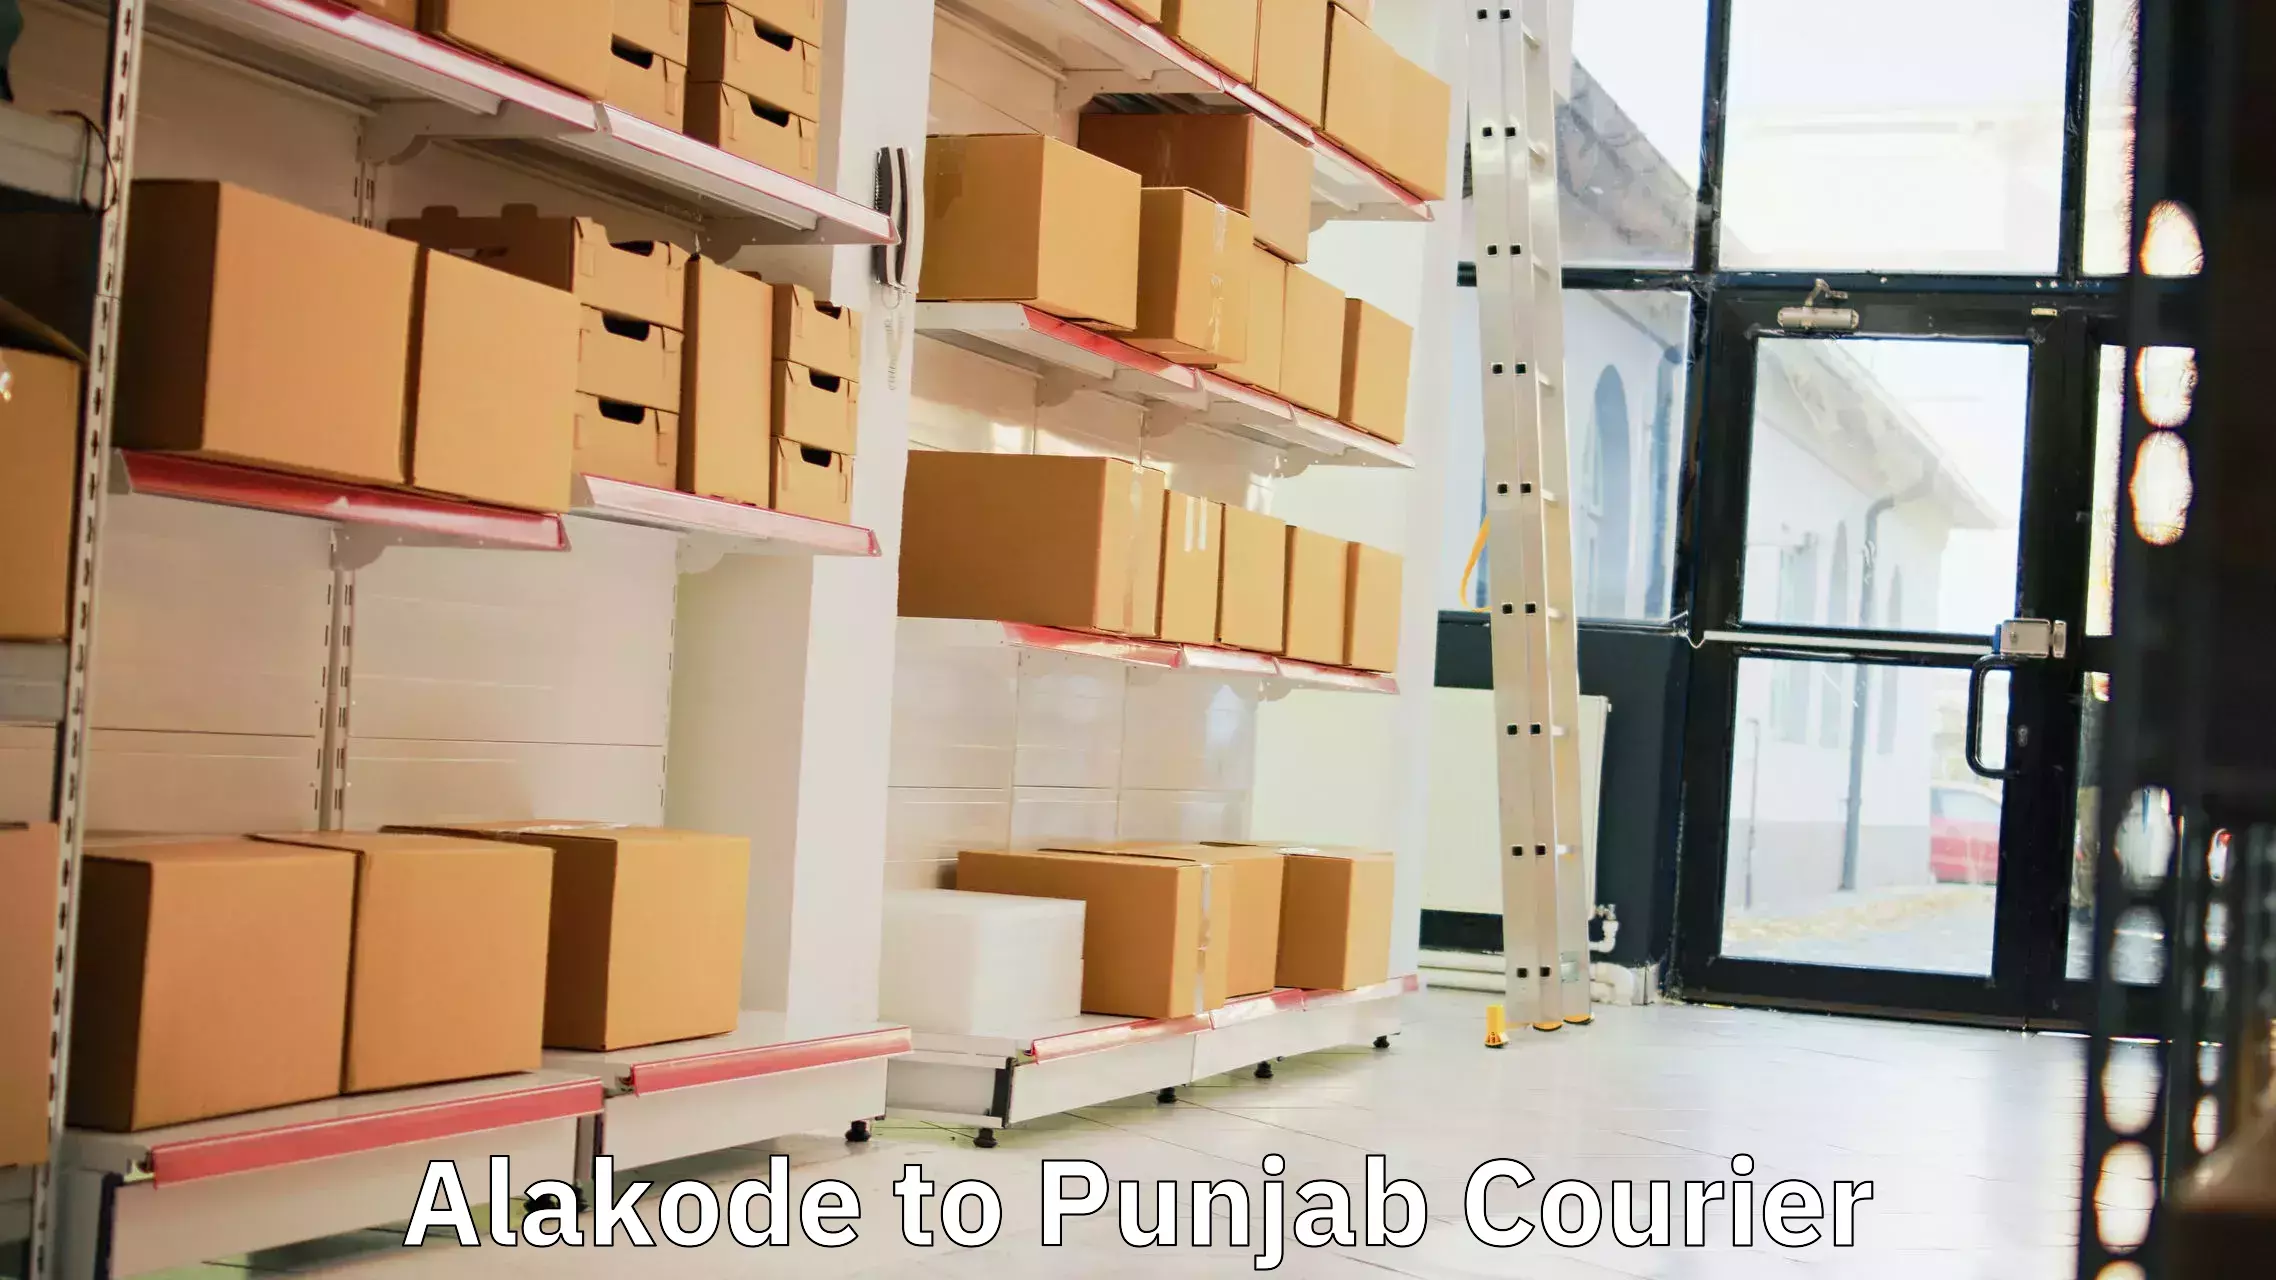 Courier service partnerships in Alakode to Sirhind Fatehgarh